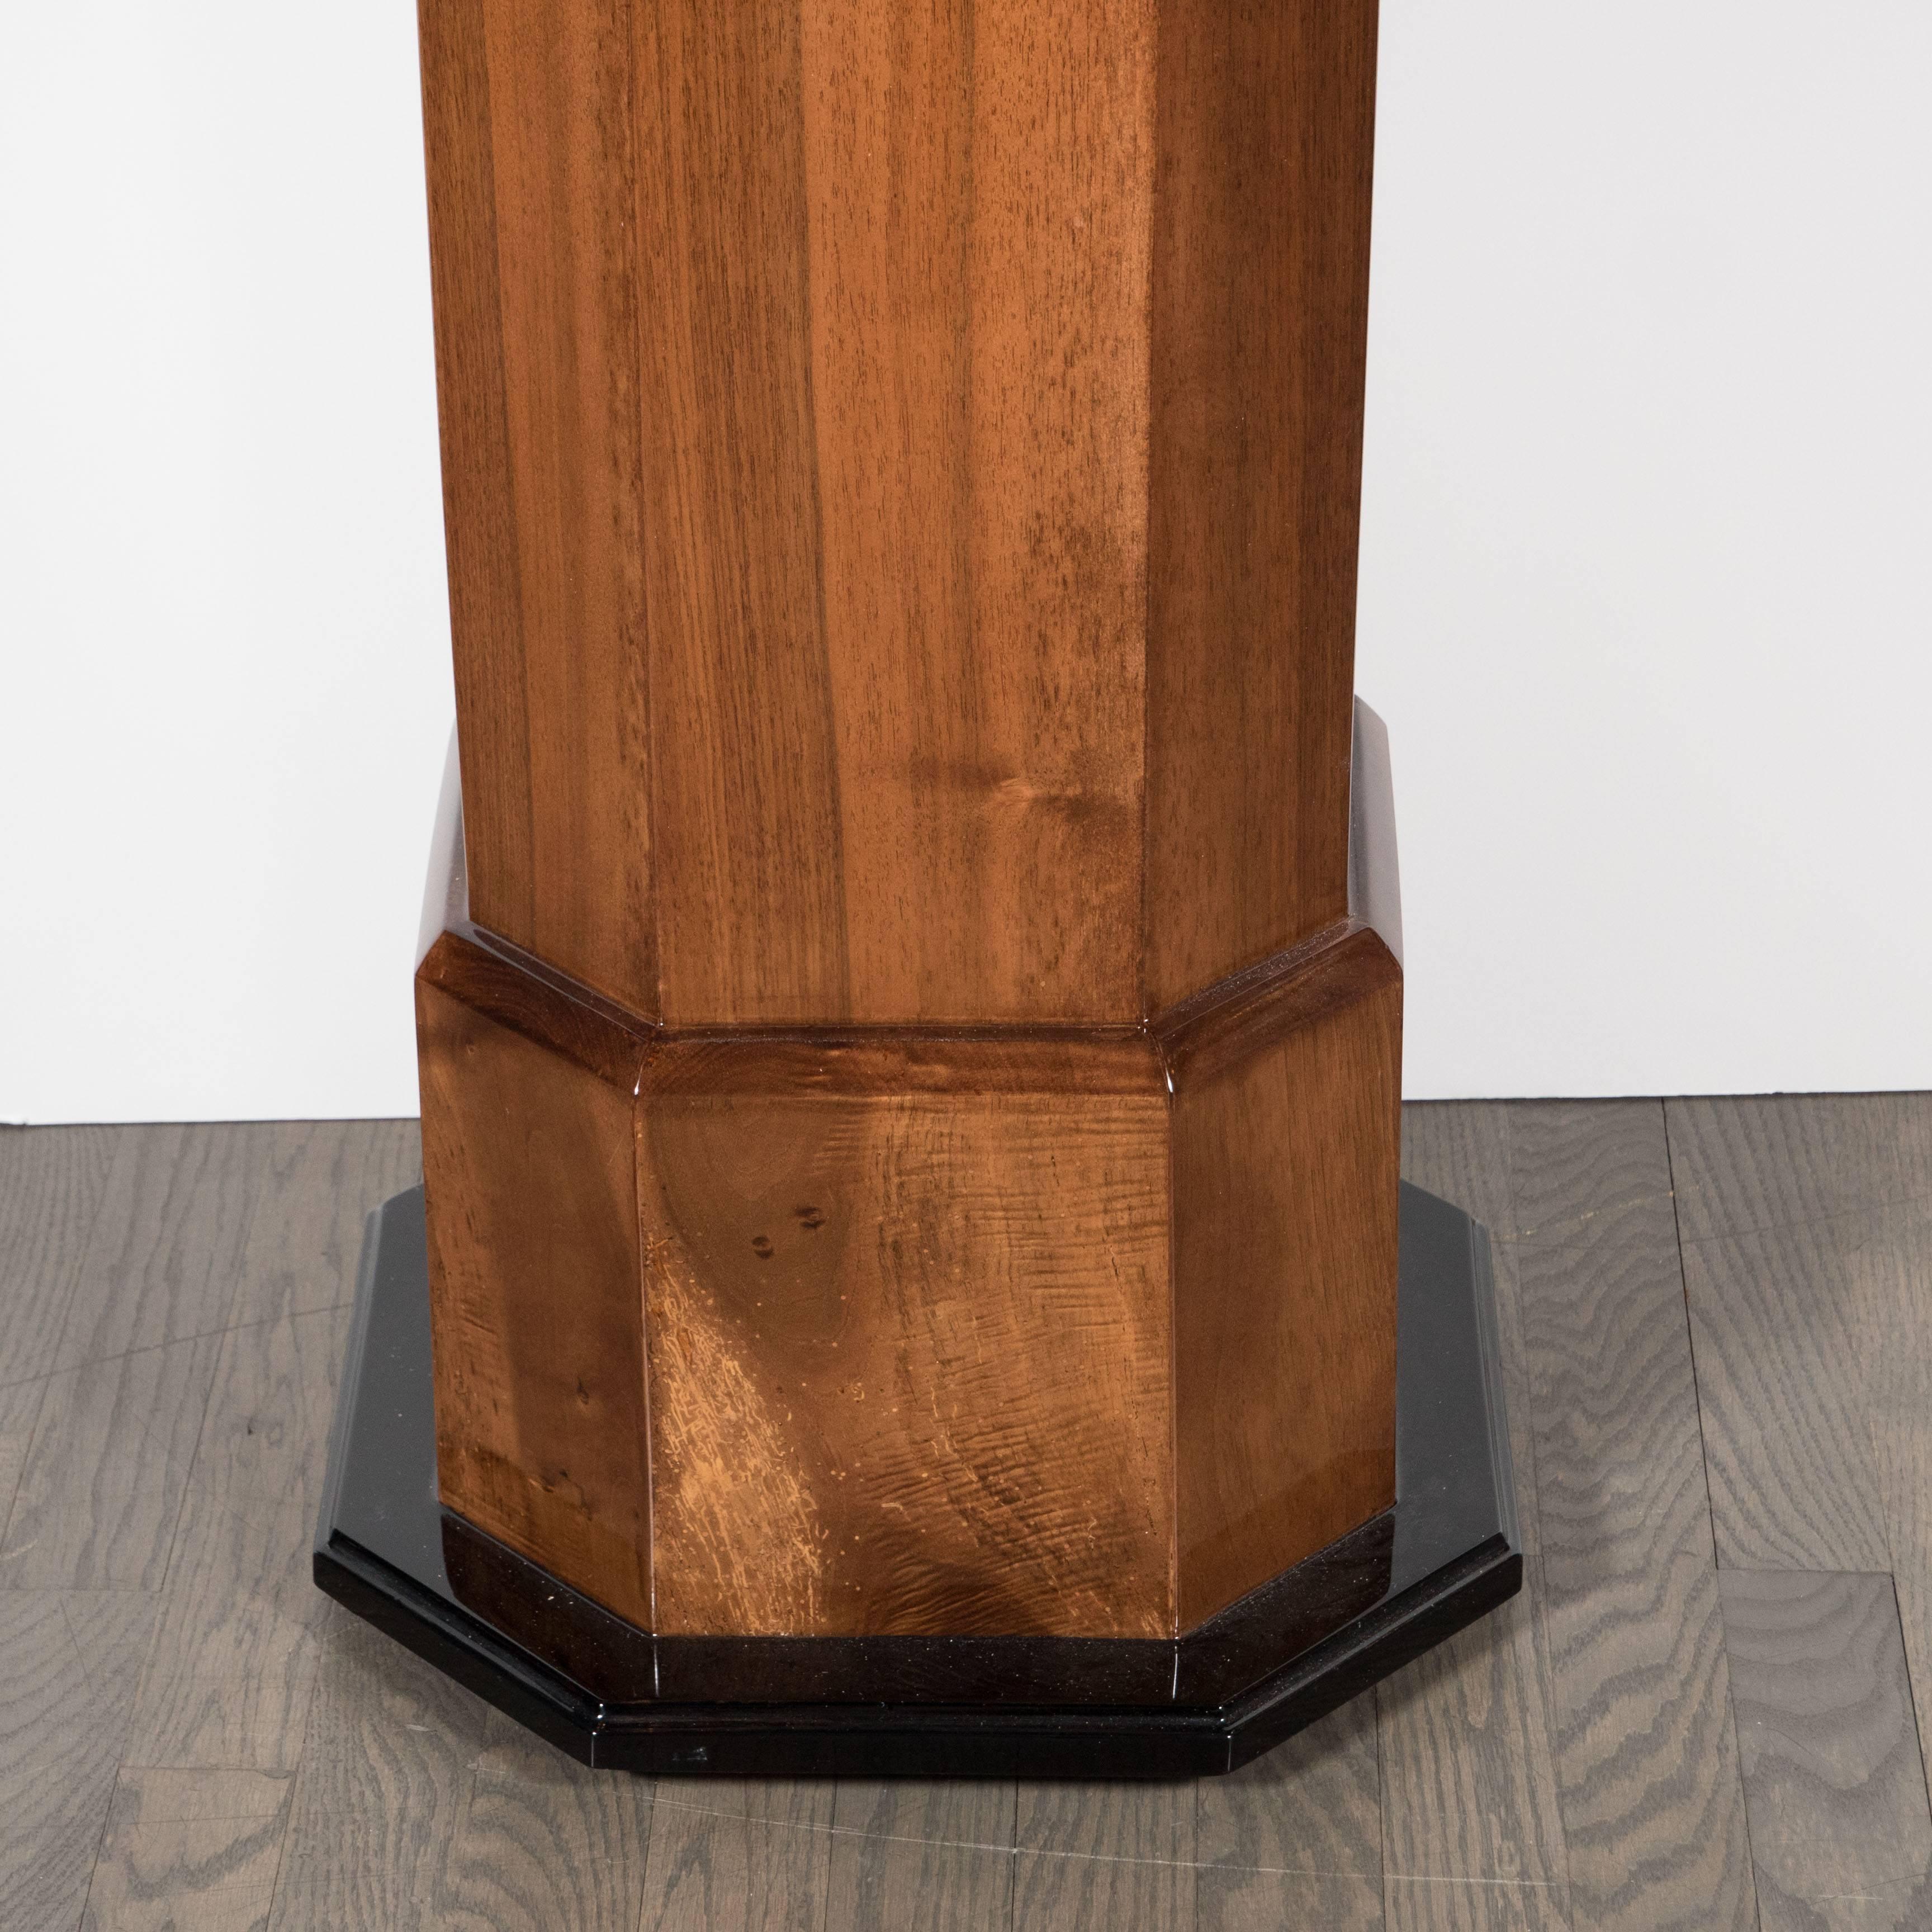 Mid-20th Century Art Deco Skyscraper-Style Pedestal in Bookmatched Walnut with Lacquer Accents